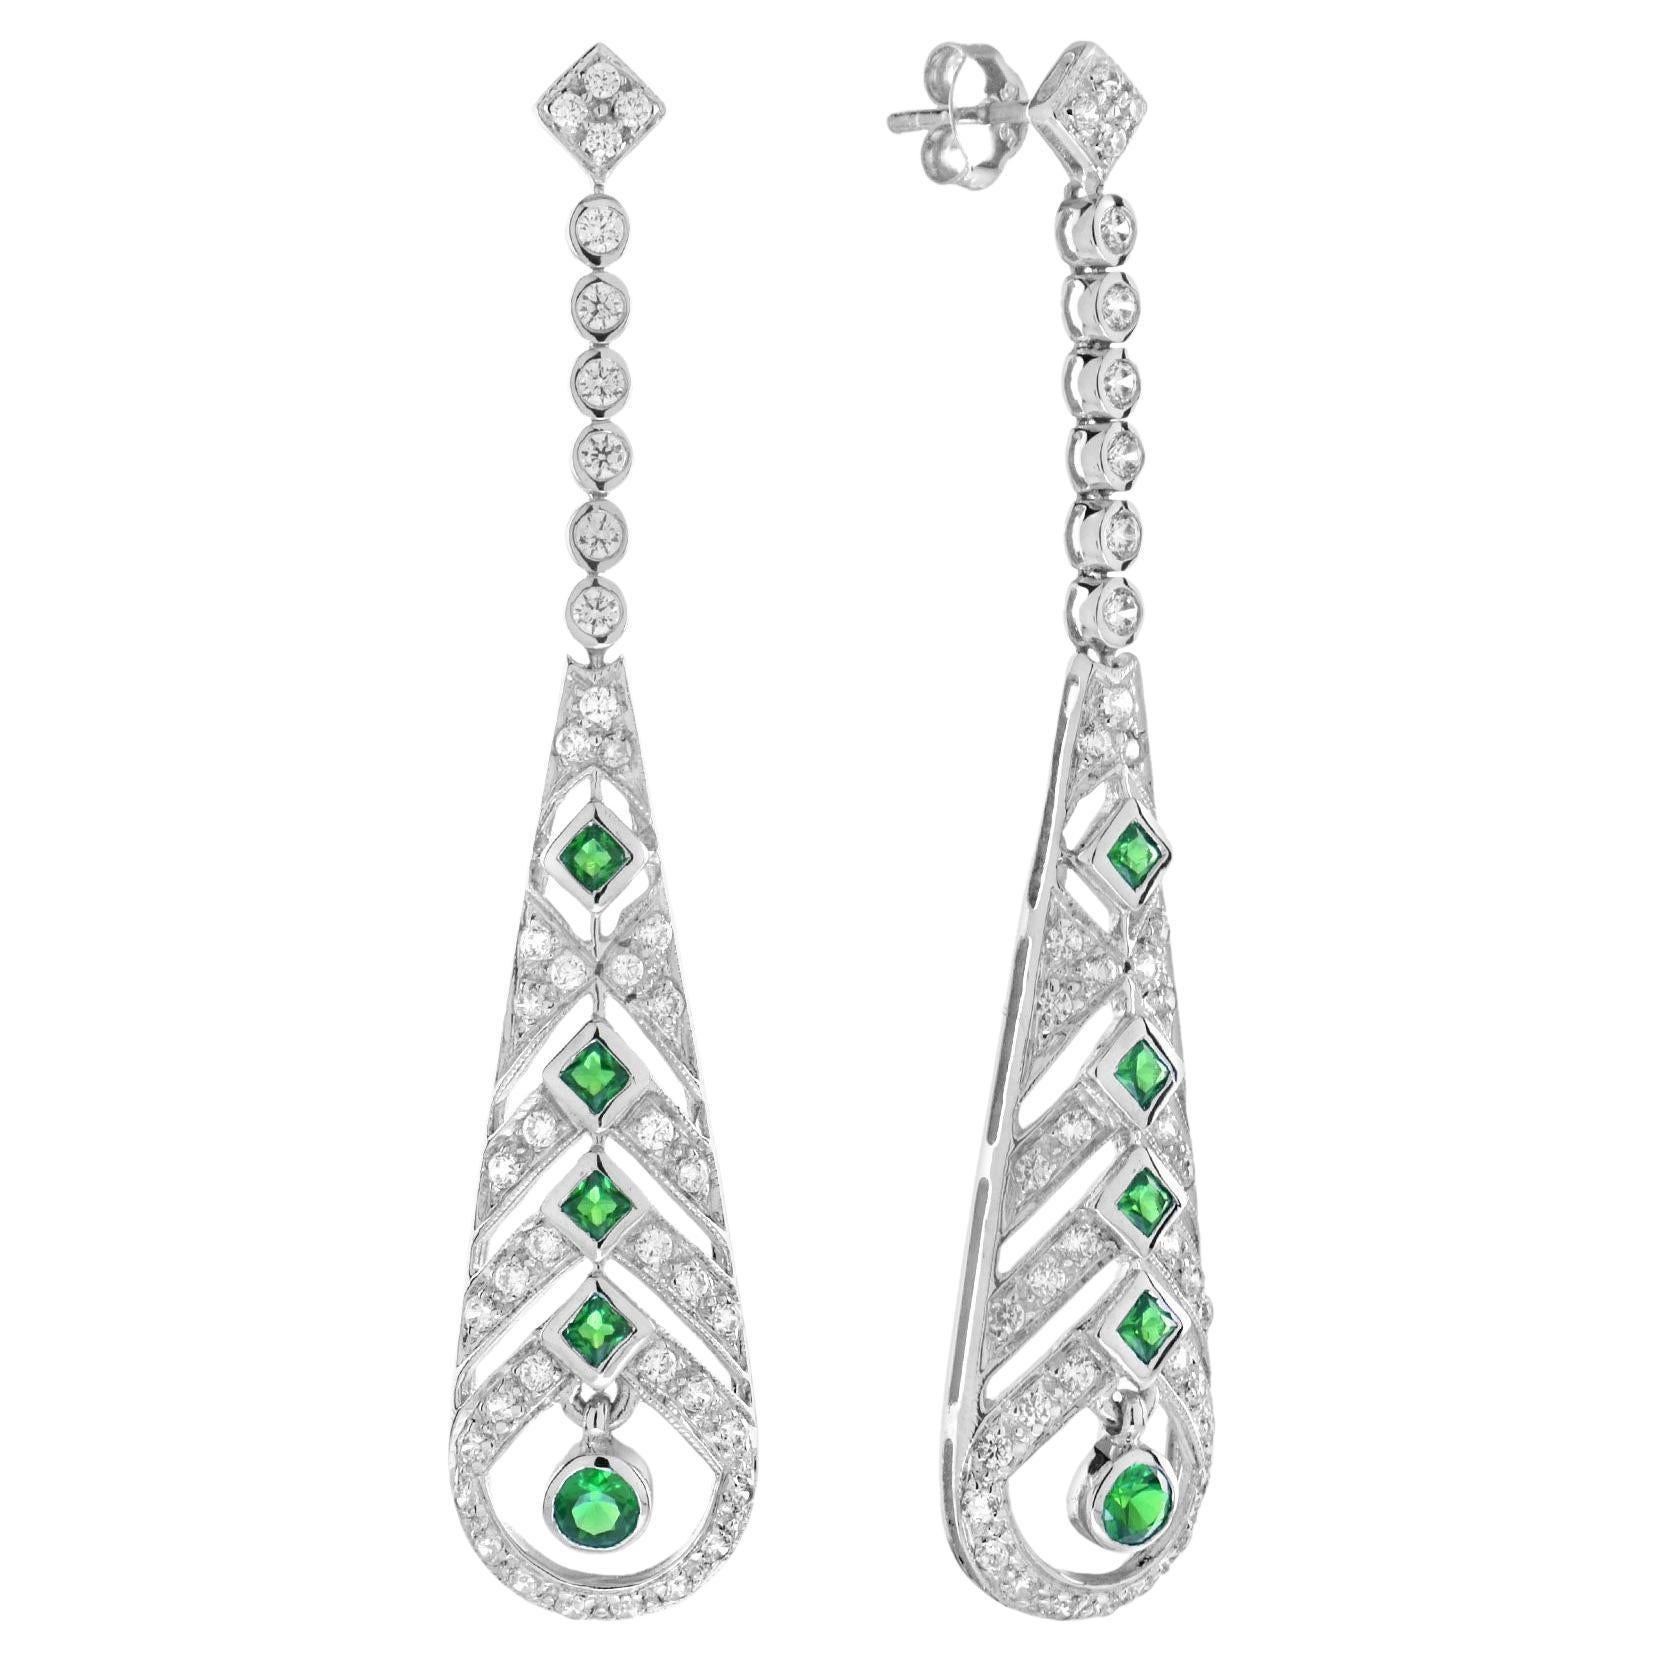 Emerald and Diamond Art Deco Style Drop Earrings in 18K White Gold